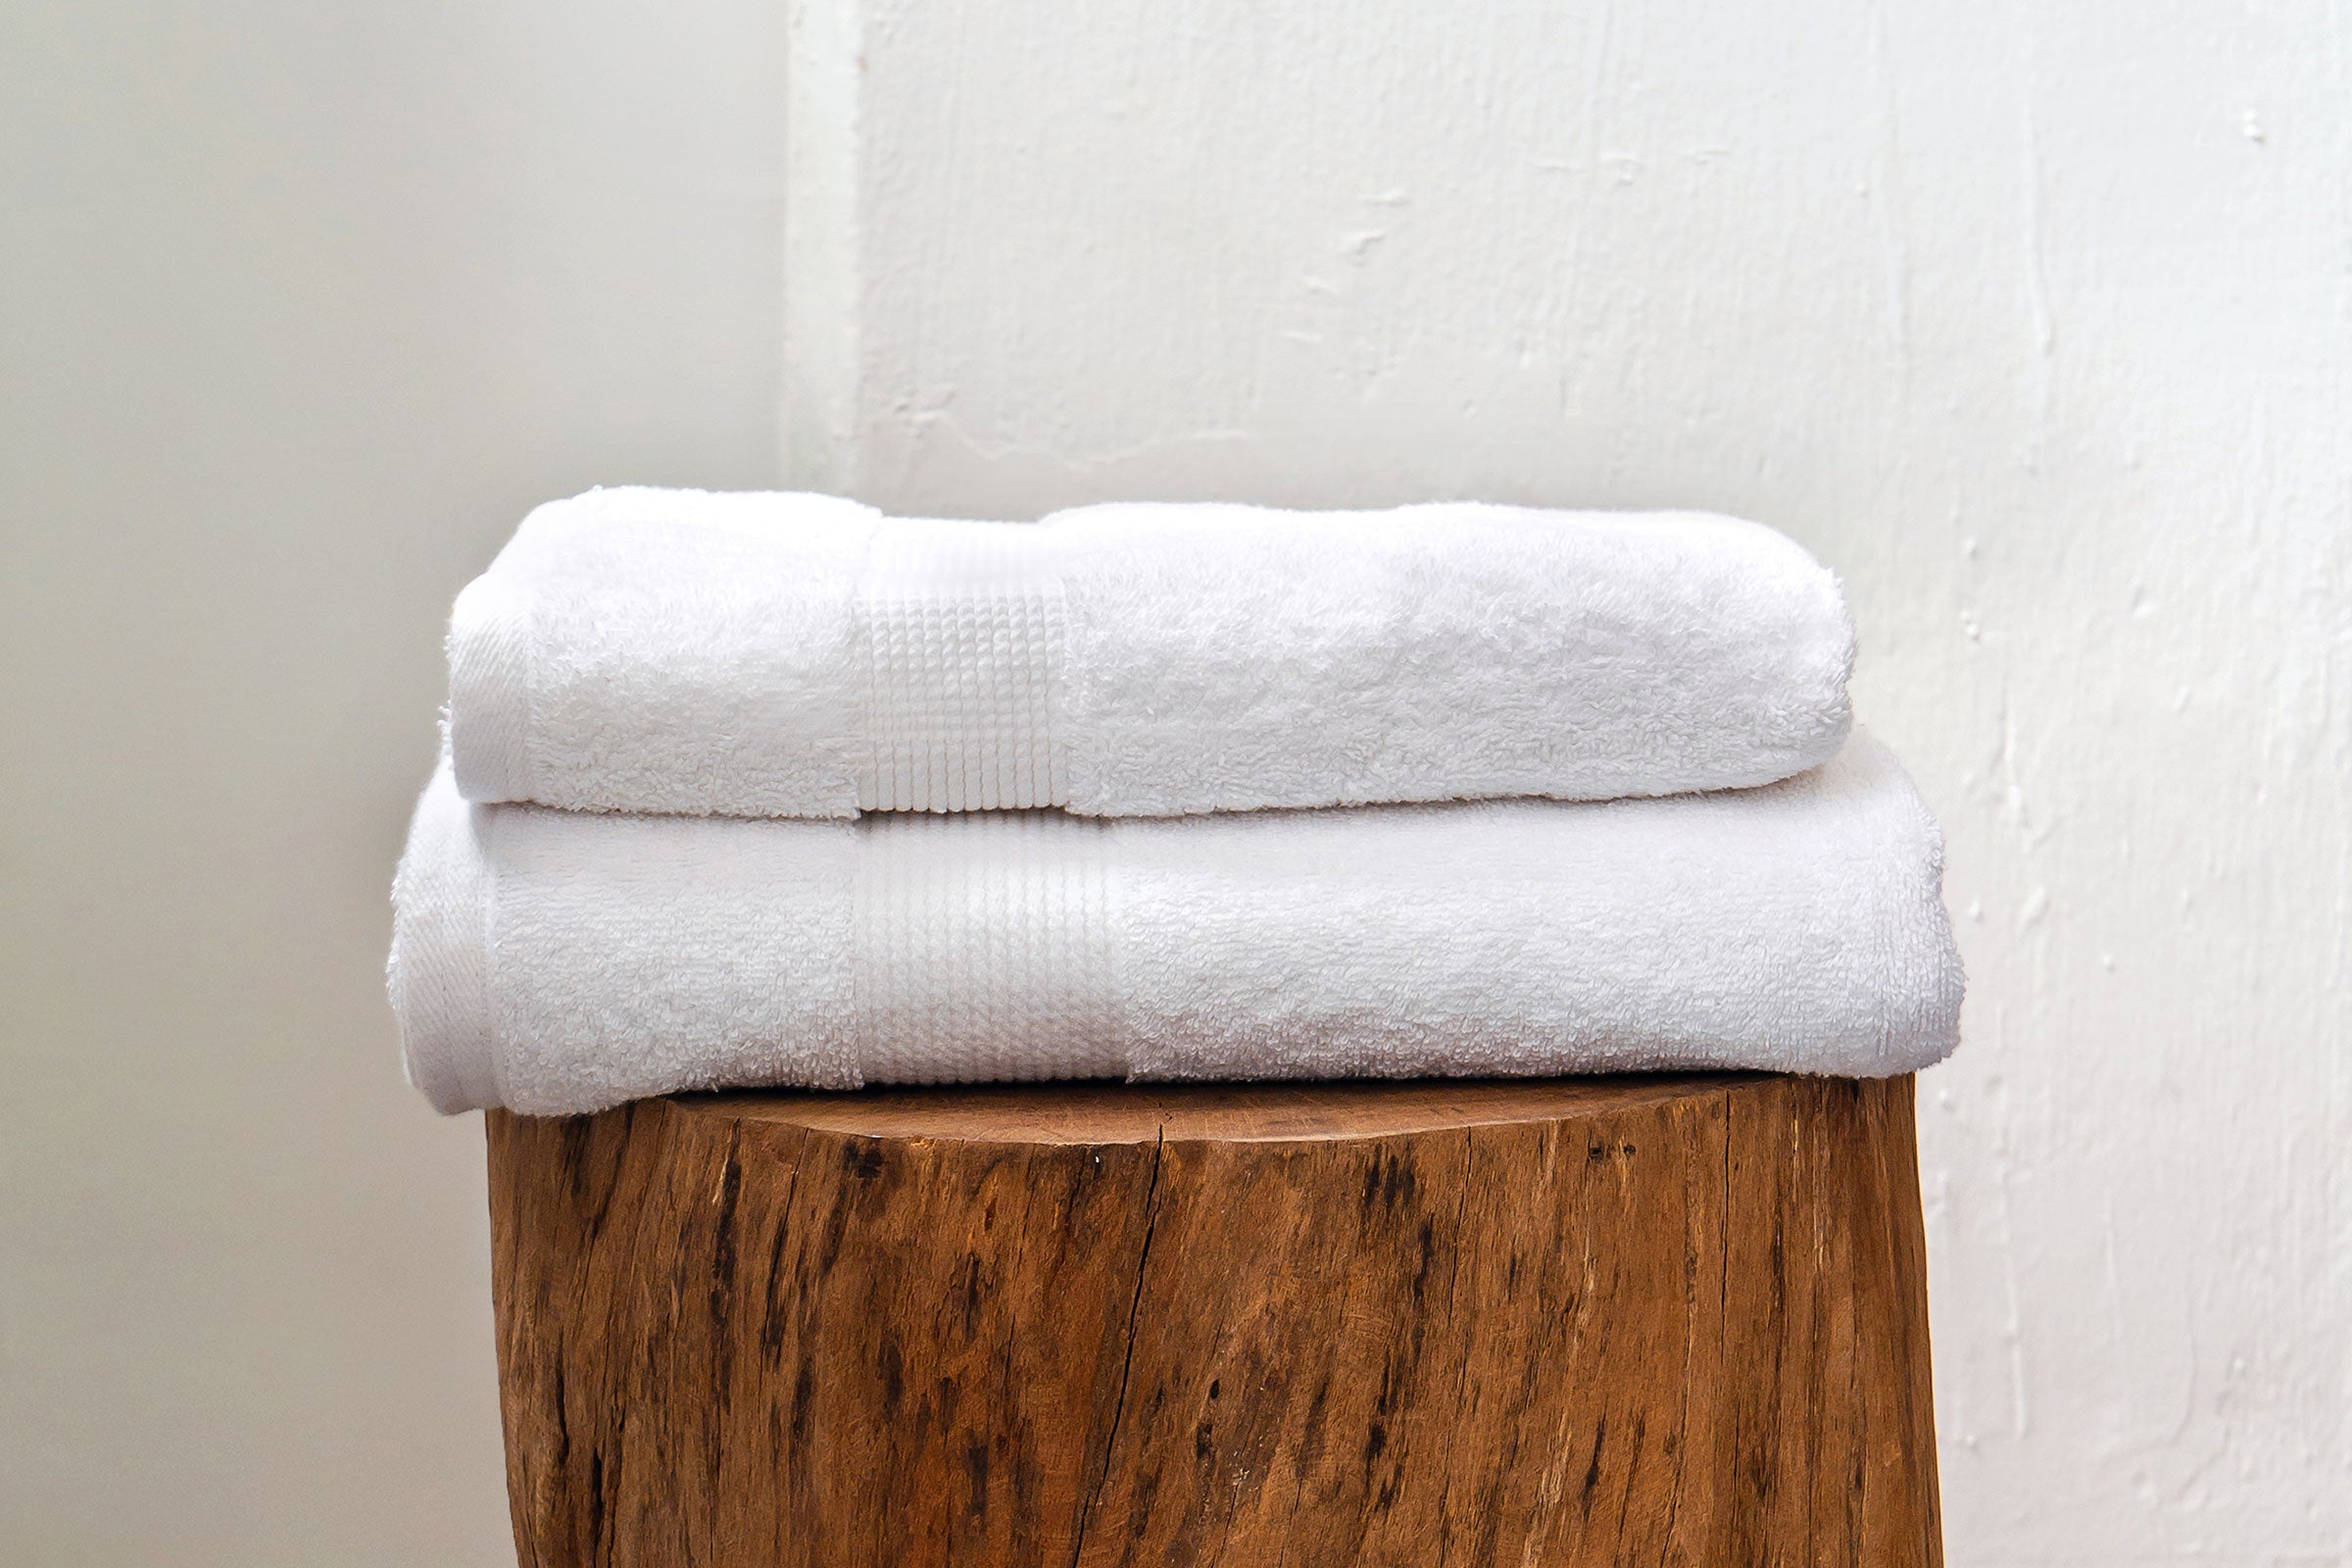 organic-cotton-bath-towel-in-white-colour-on-wood-by-sojao